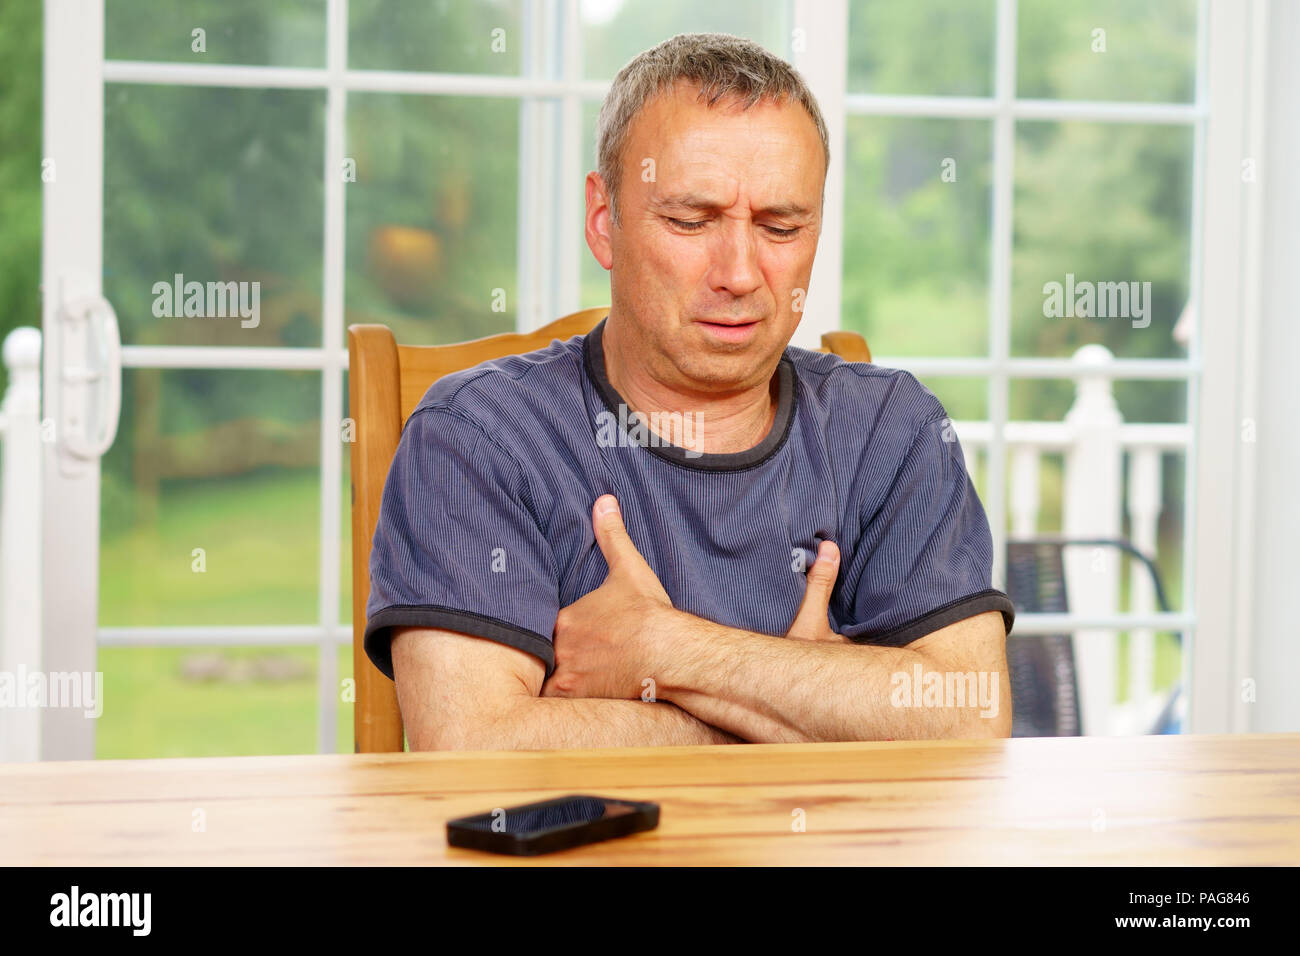 Caucasian man, alone, sit at a table, day, worrying about his situation. Questionning himself. Stock Photo